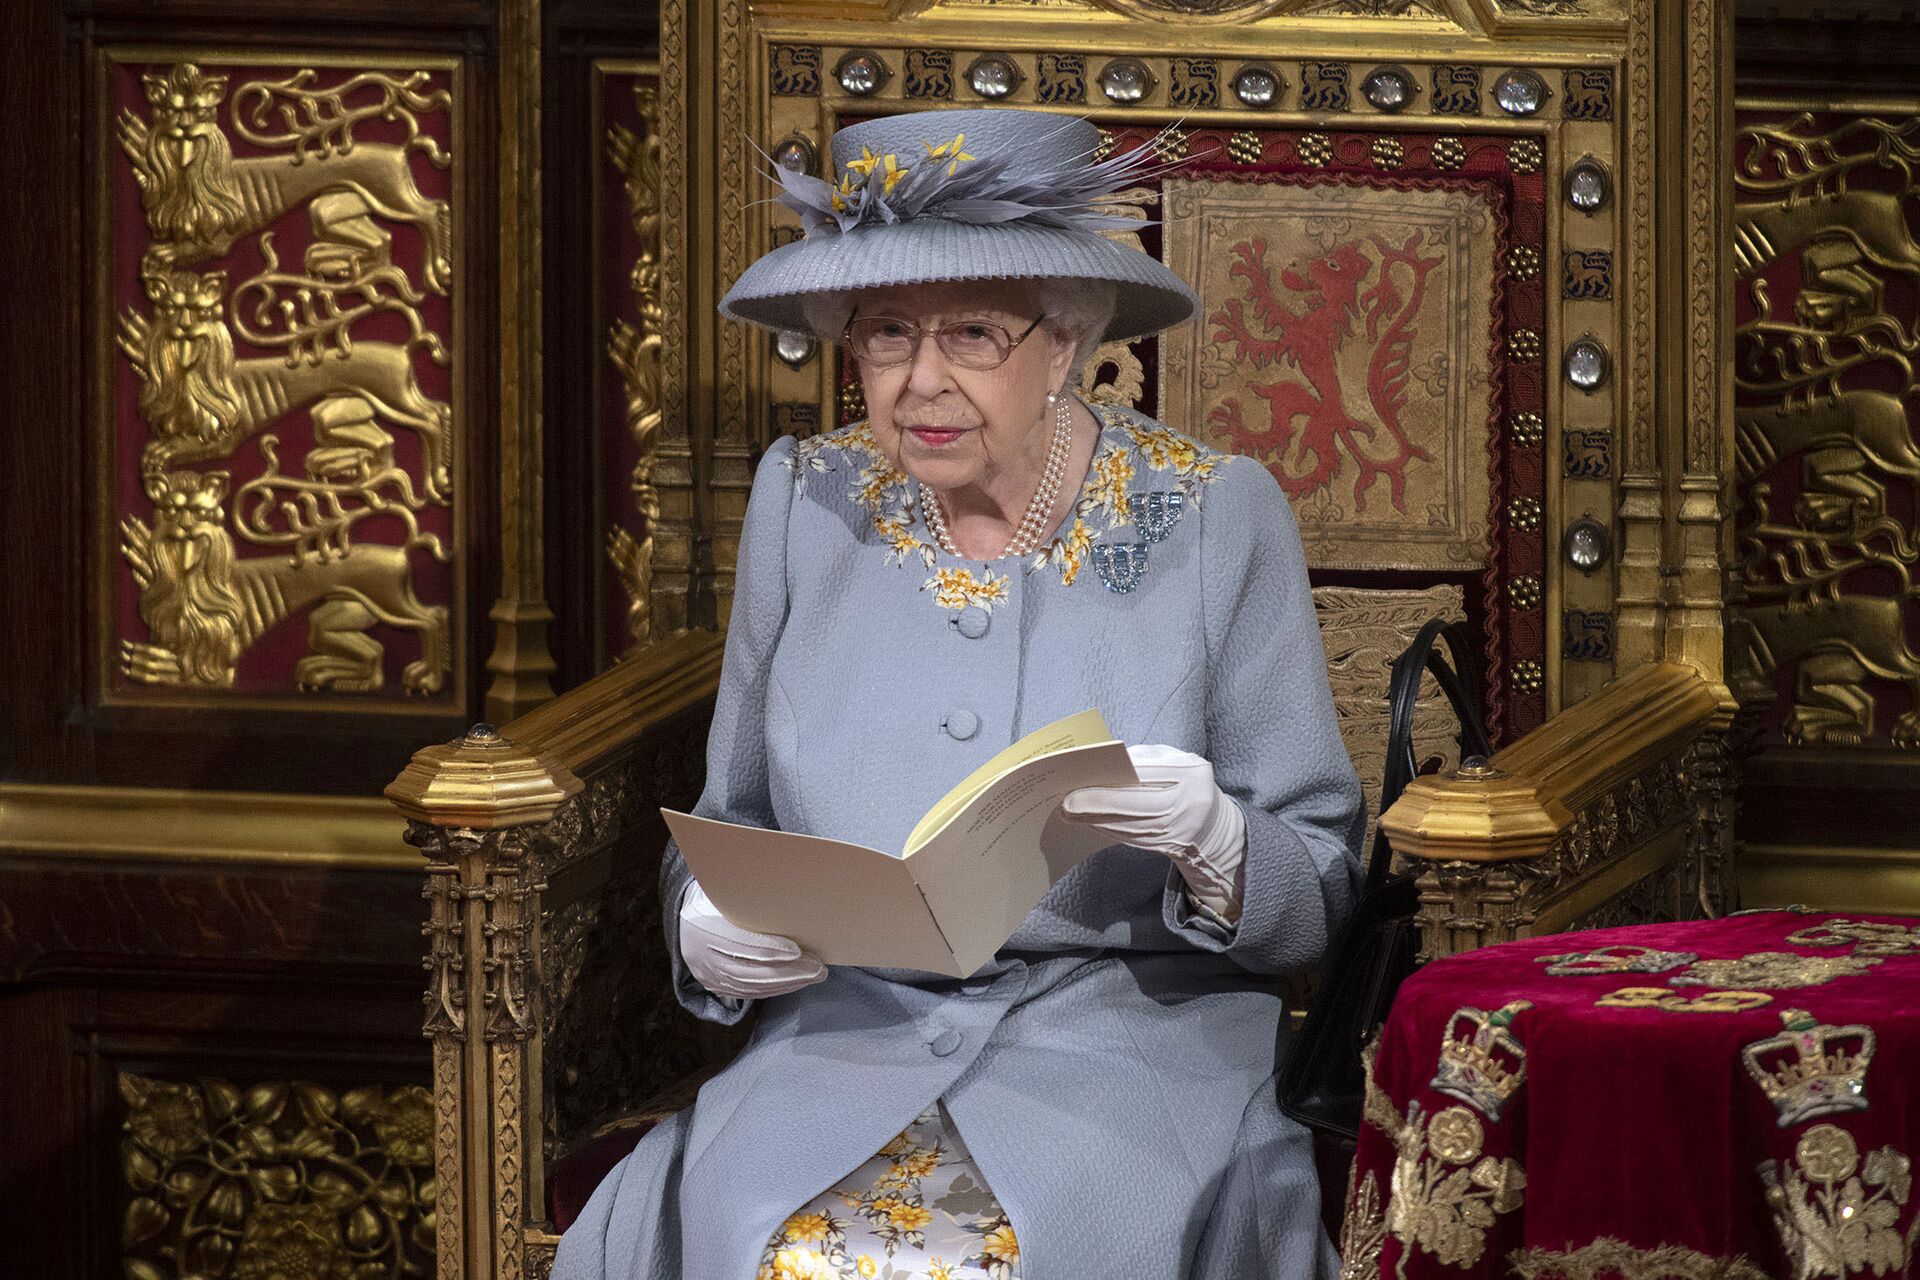 Britain's Queen Elizabeth II delivers the speech in the House of Lords during the State Opening of Parliament at the Palace of Westminster in London, Tuesday May 11, 2021. (Eddie Mulholland/Pool via AP) - Sputnik International, 1920, 08.09.2022